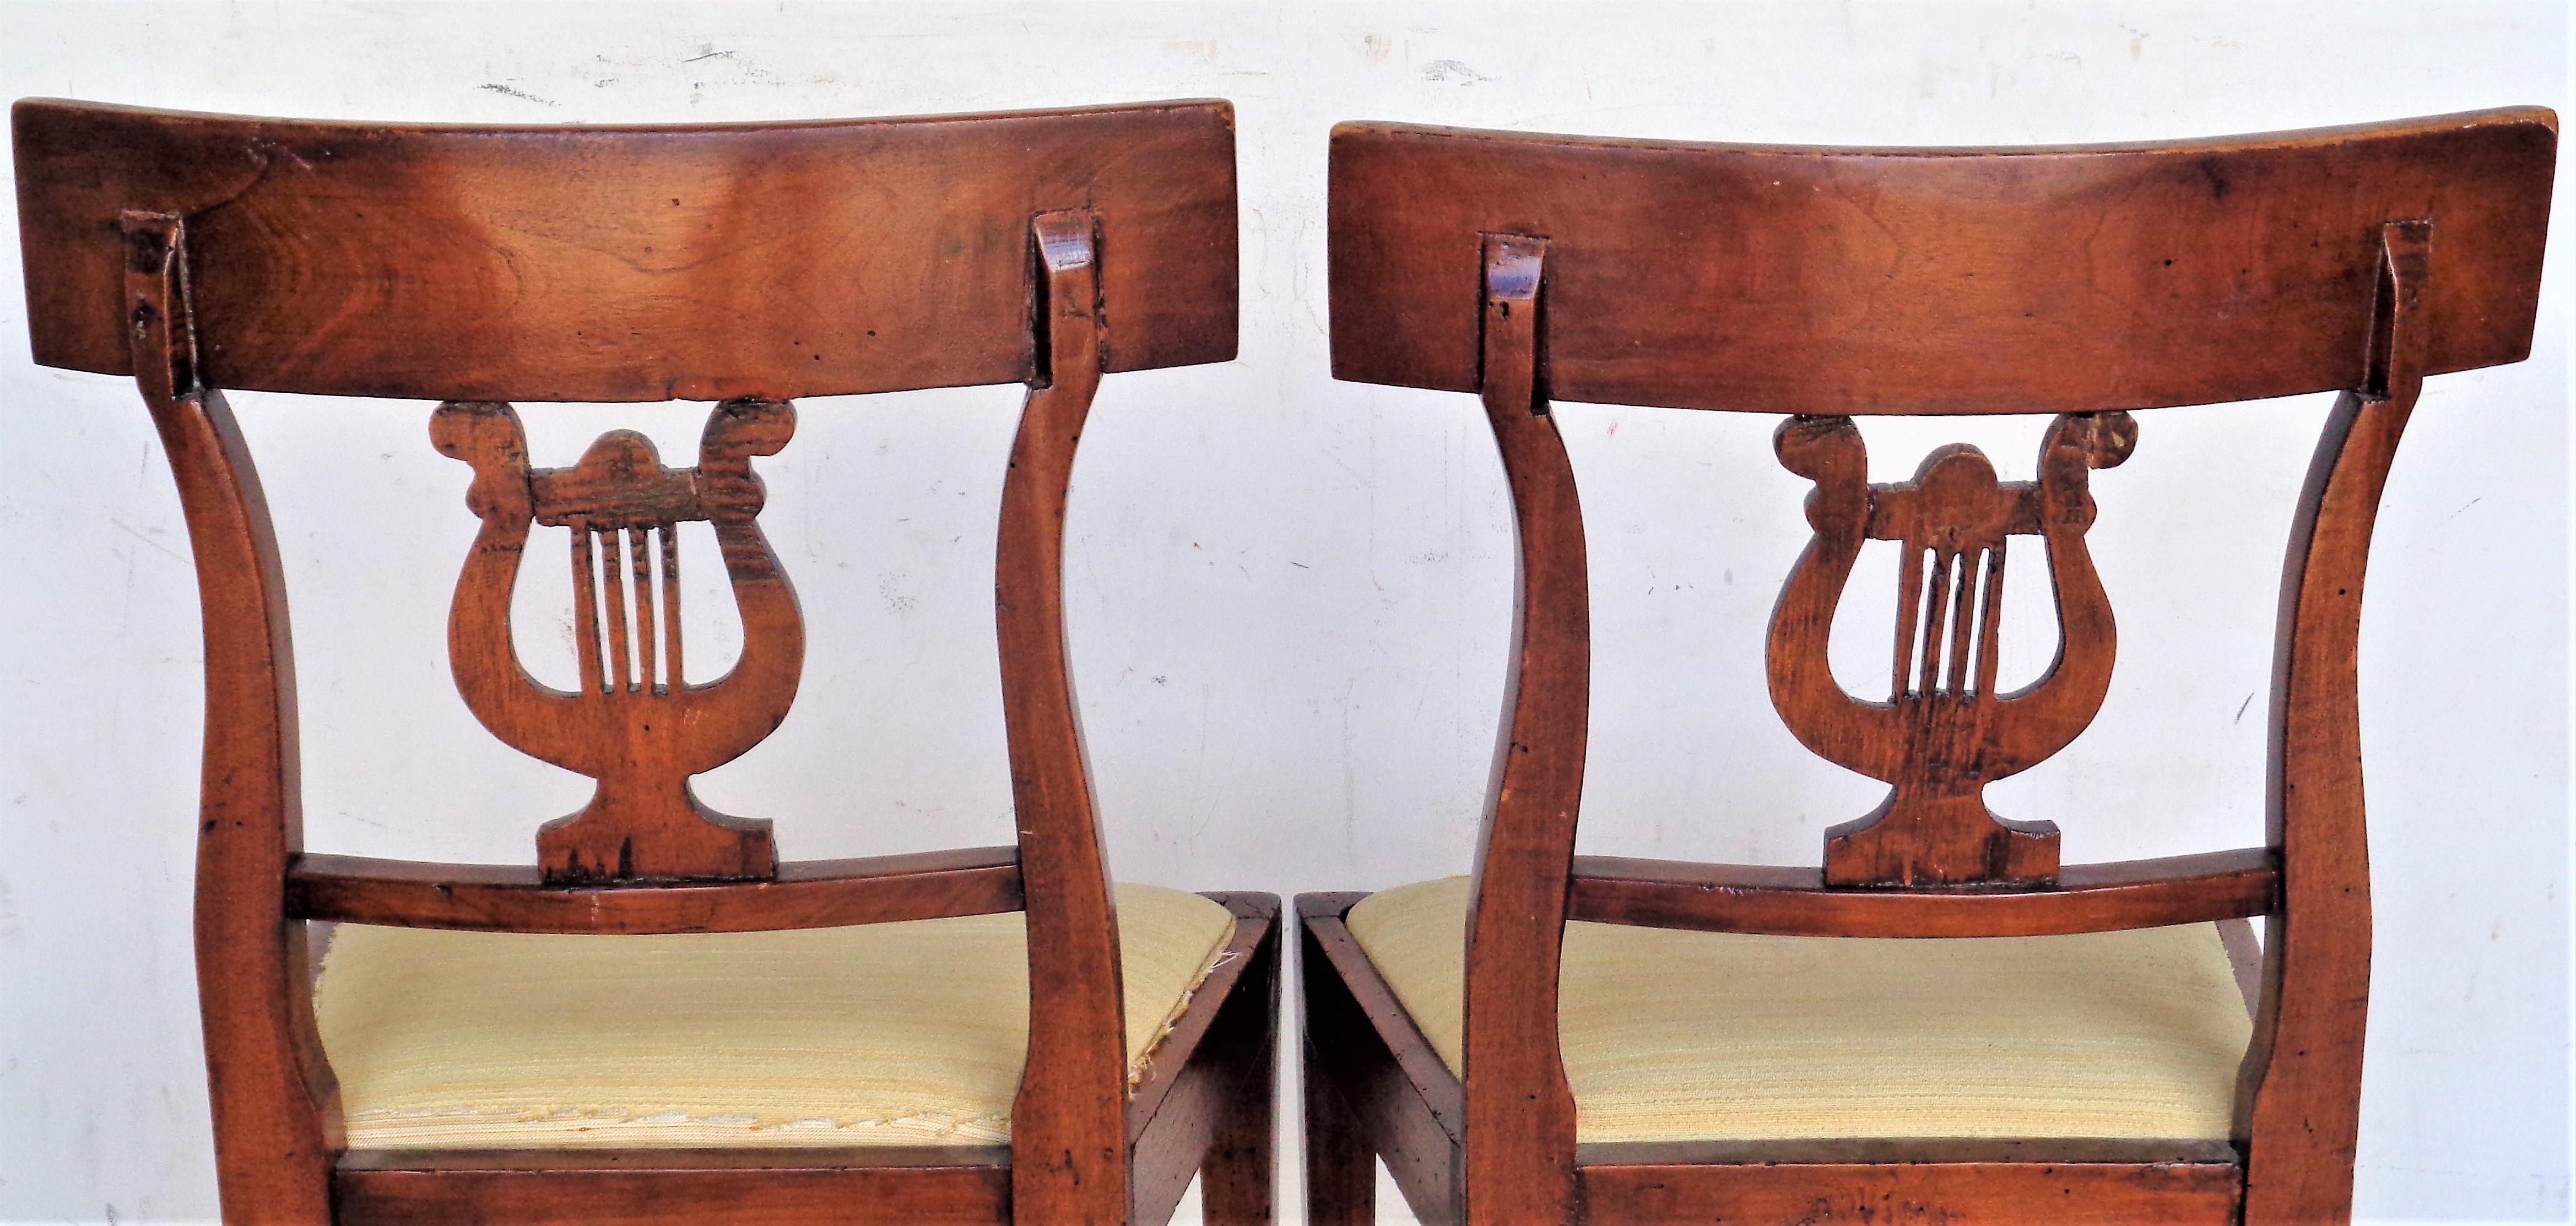 Upholstery  Italian Neoclassical Lyre Back Chairs, Circa 1800 For Sale